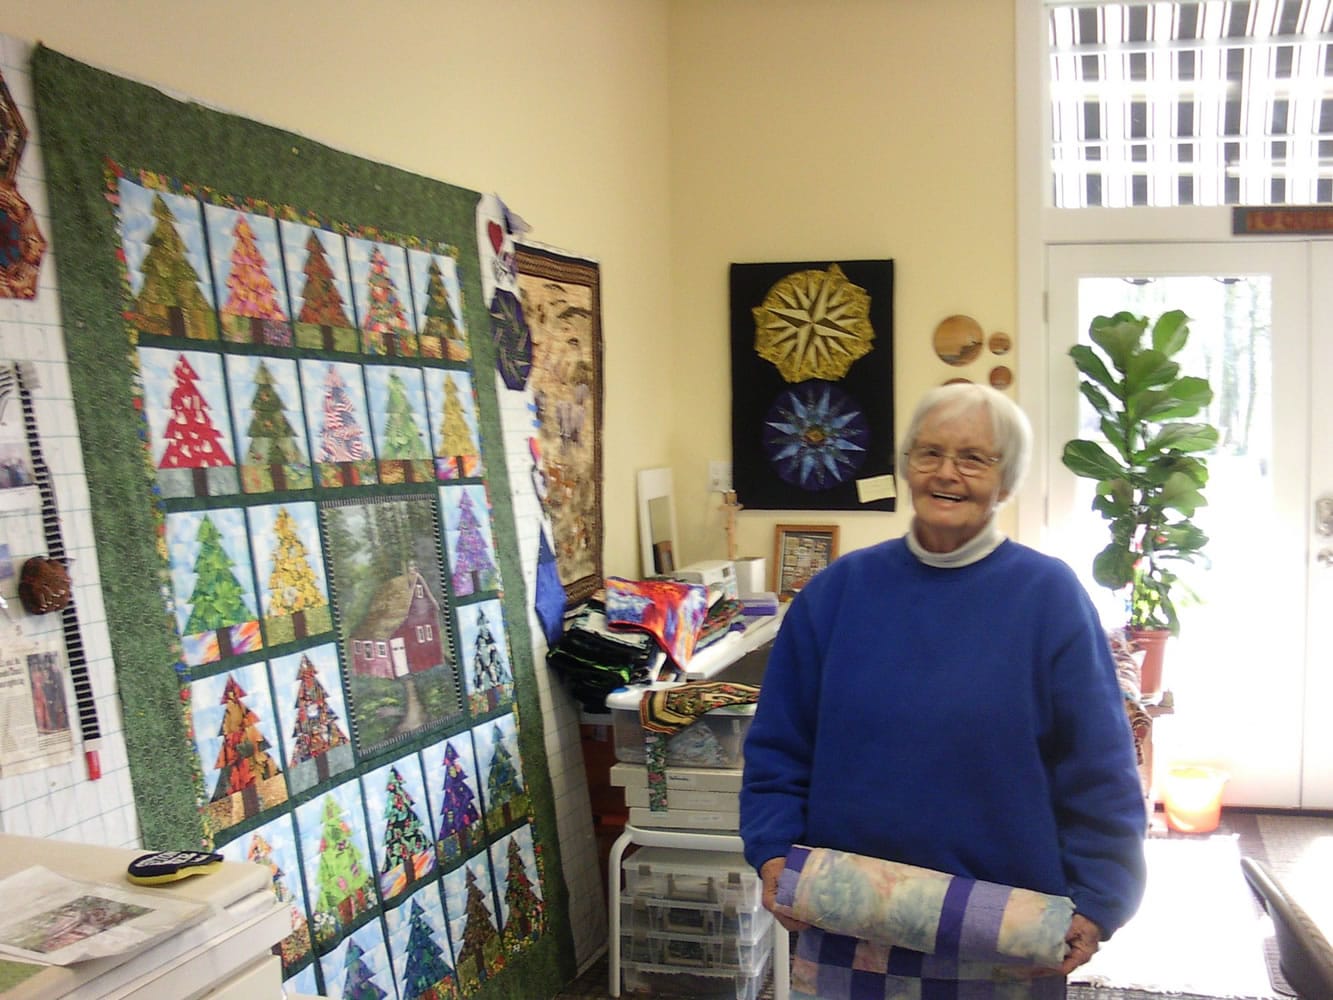 Battle Ground:  Mary Jo Lewis created this quilt featuring a center block of the Historic Venersborg Schoolhouse.